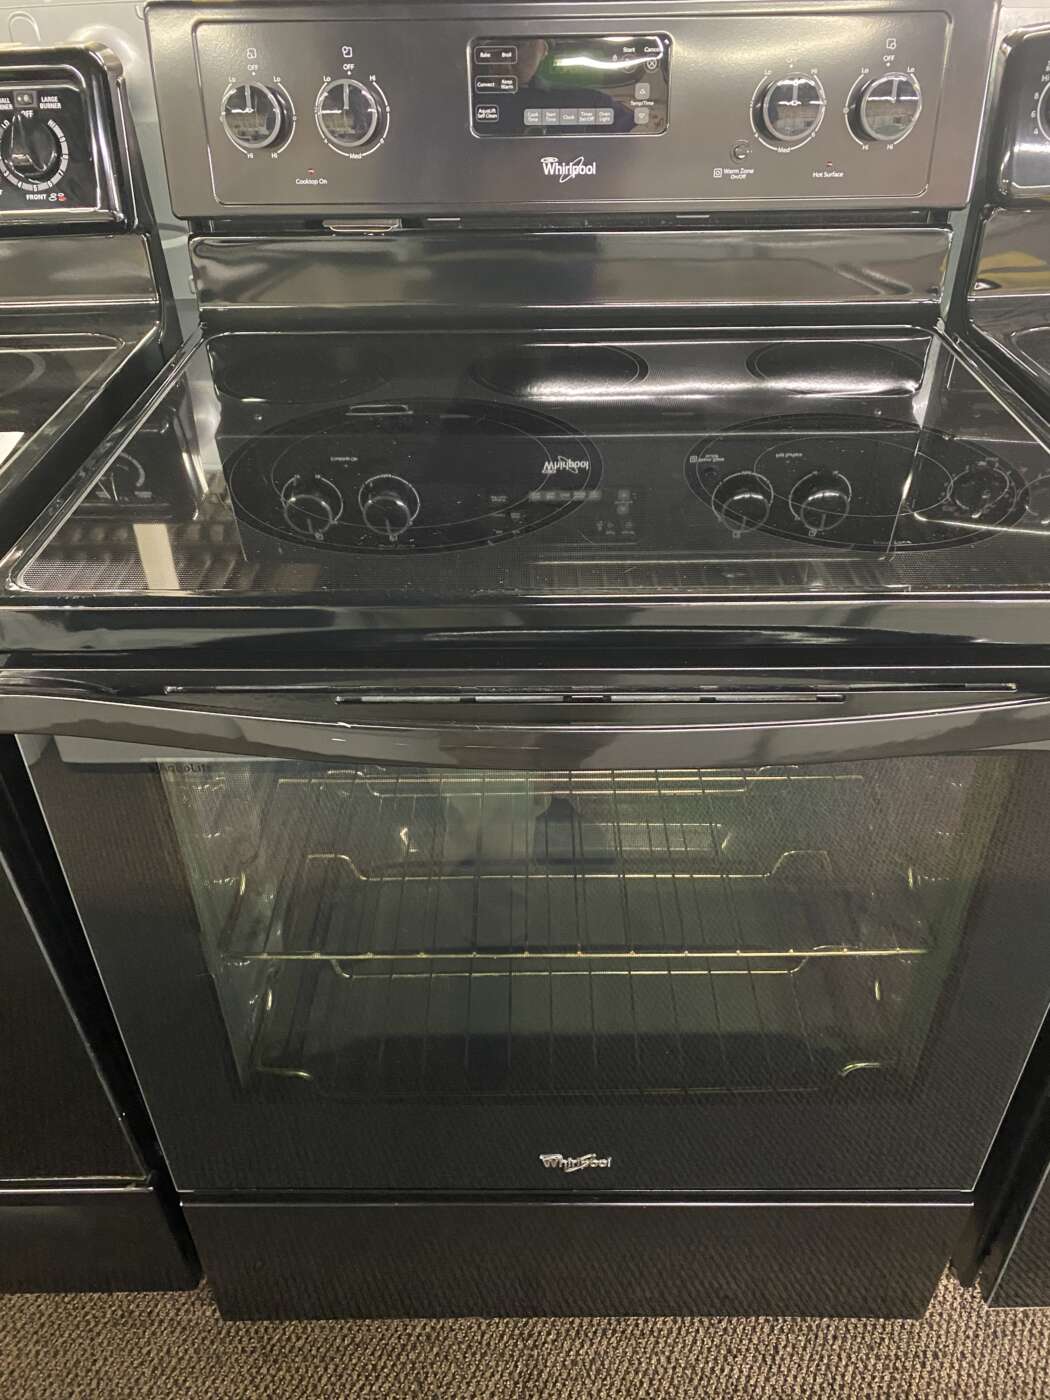 Reconditioned WHIRLPOOL Electric Range